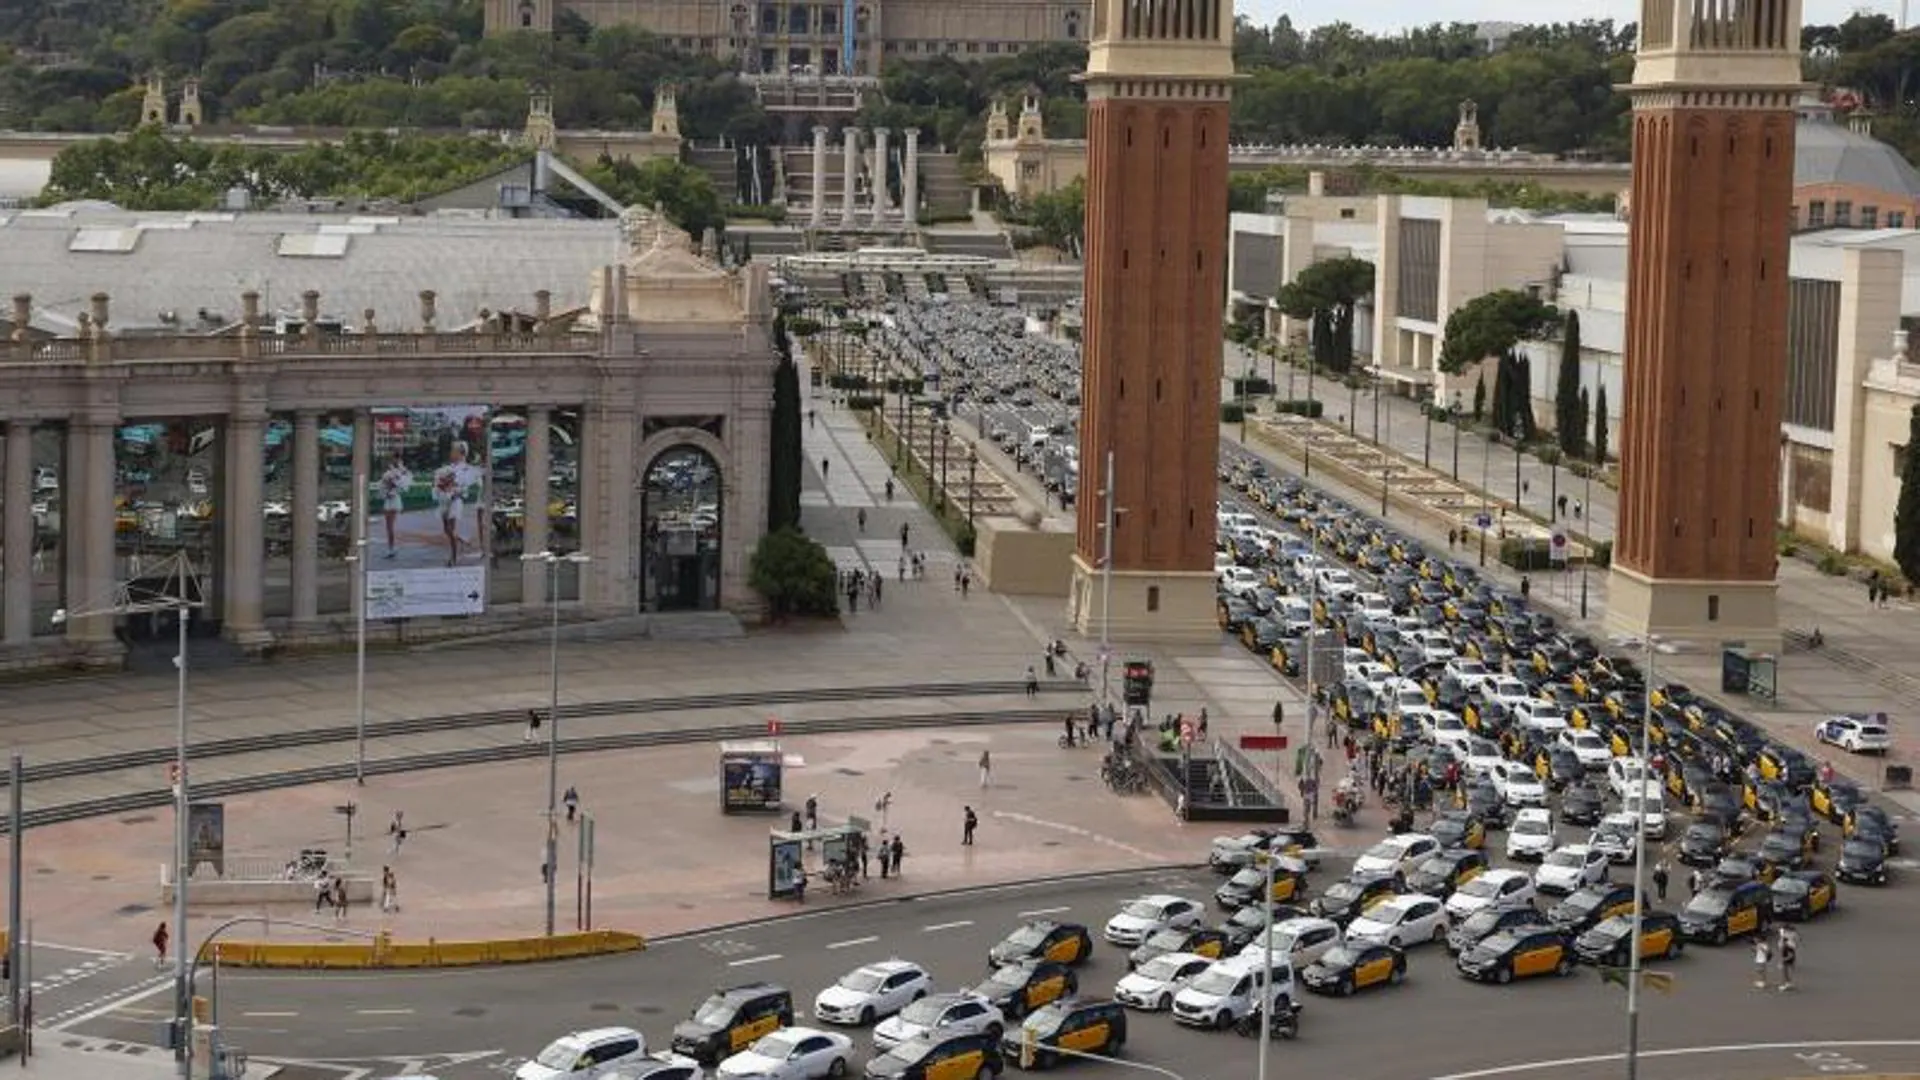 The taxi drivers of the islands, vigilant before the landing of Uber in the Canary Islands